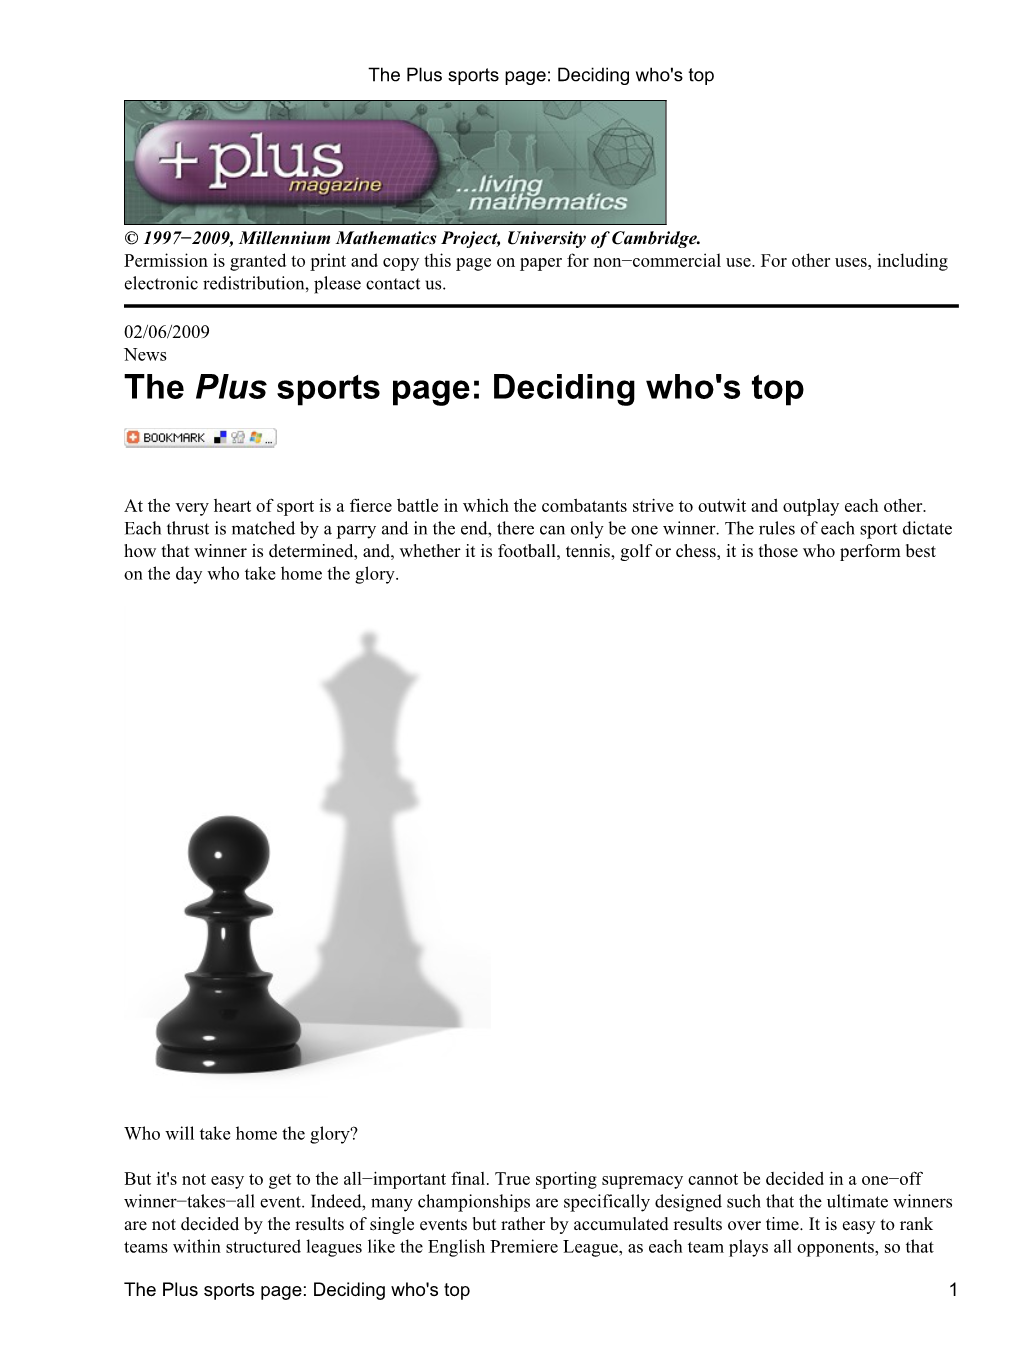 The Plus Sports Page: Deciding Who's Top